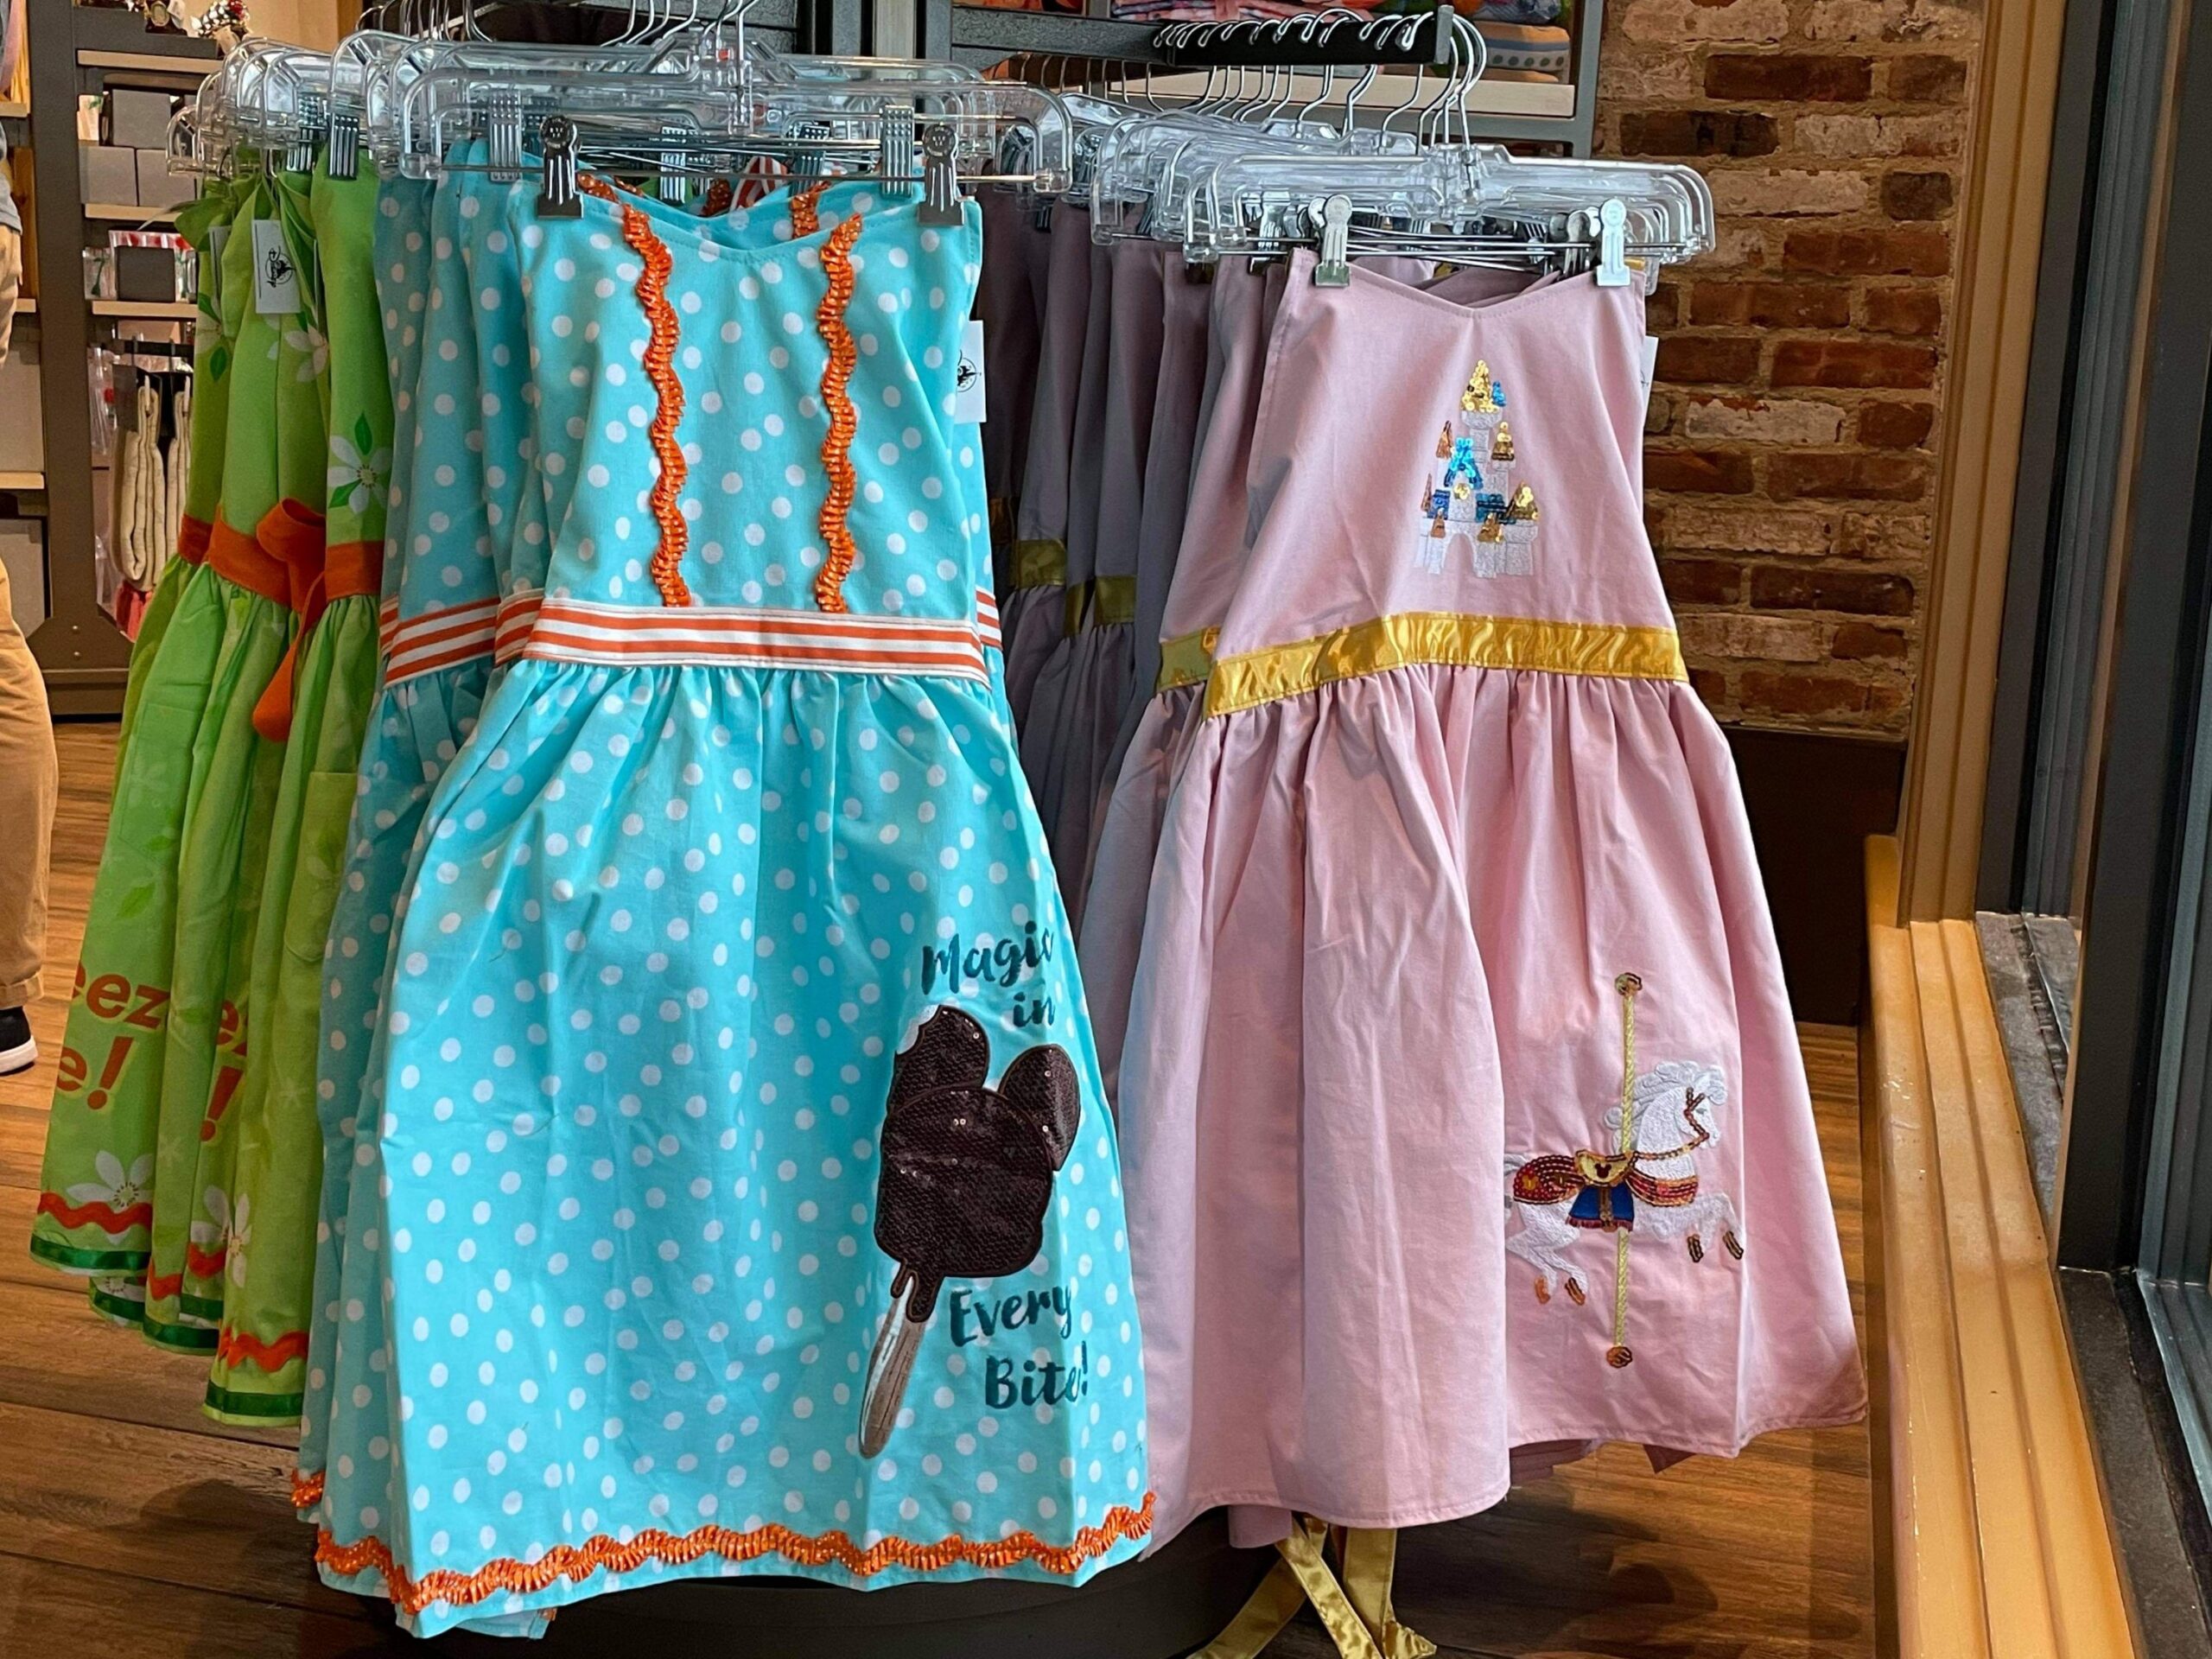 PHOTOS: NEW Aprons and Kitchen Towels Themed to Enchanted Tiki Room, Orange  Bird, The Three Caballeros, and More Arrive at Disney Parks - WDW News Today